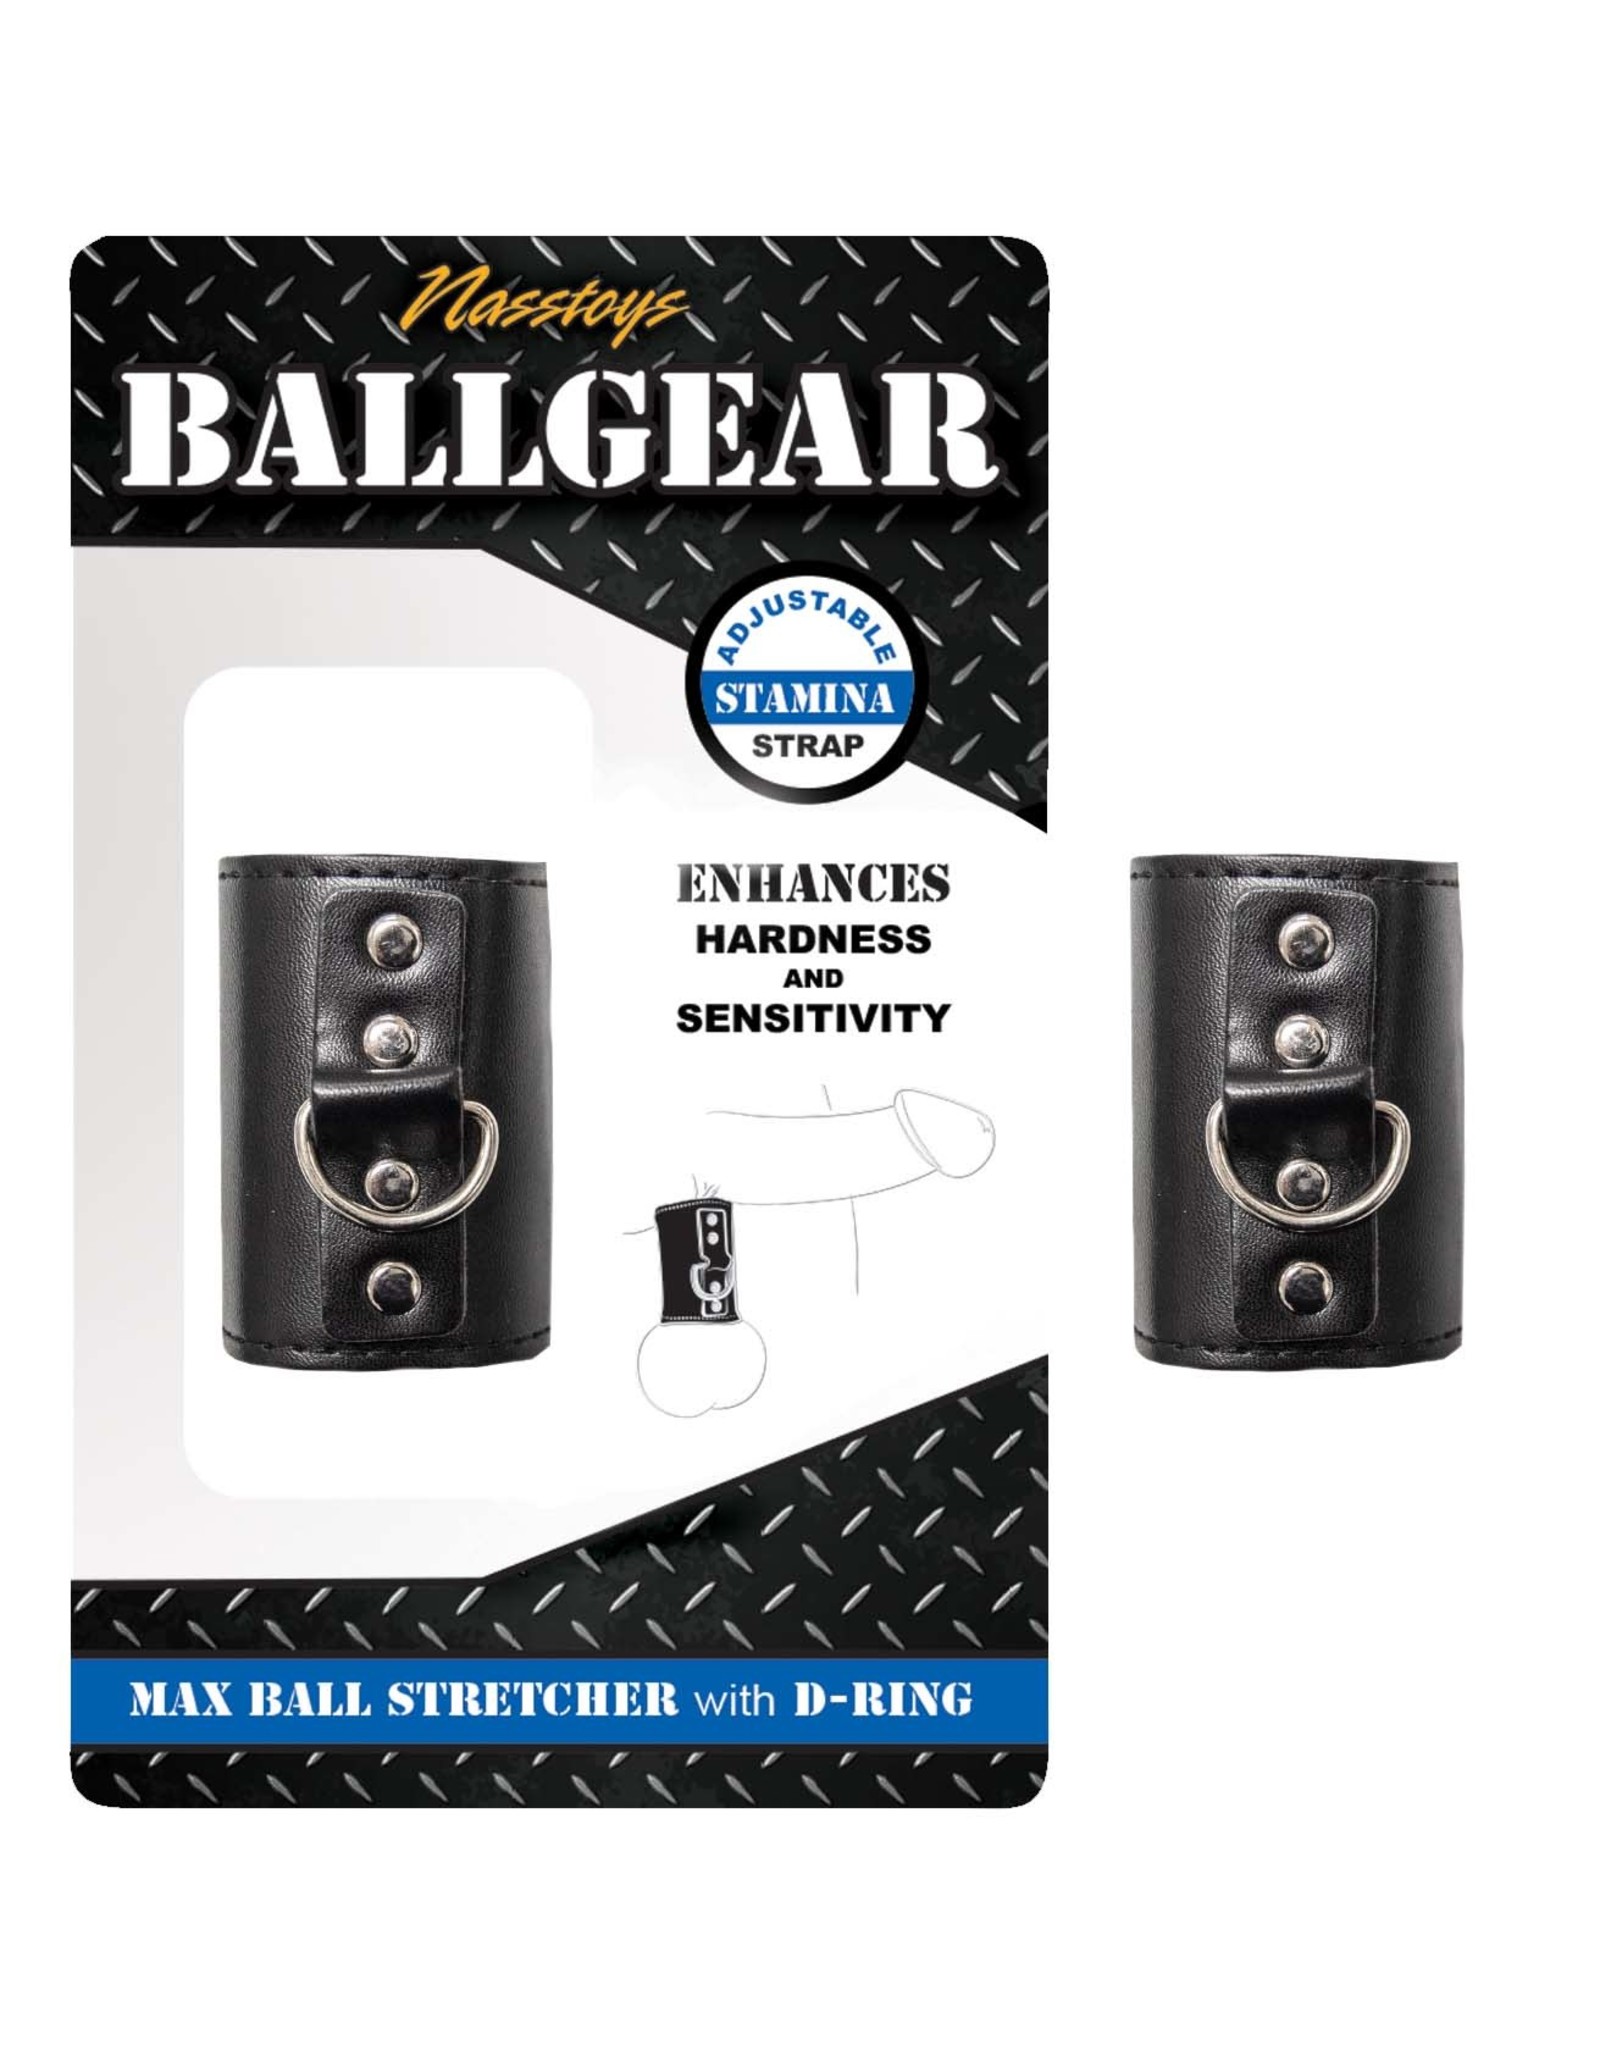 BALLGEAR BALL STRETCHER MAX WITH D-RING